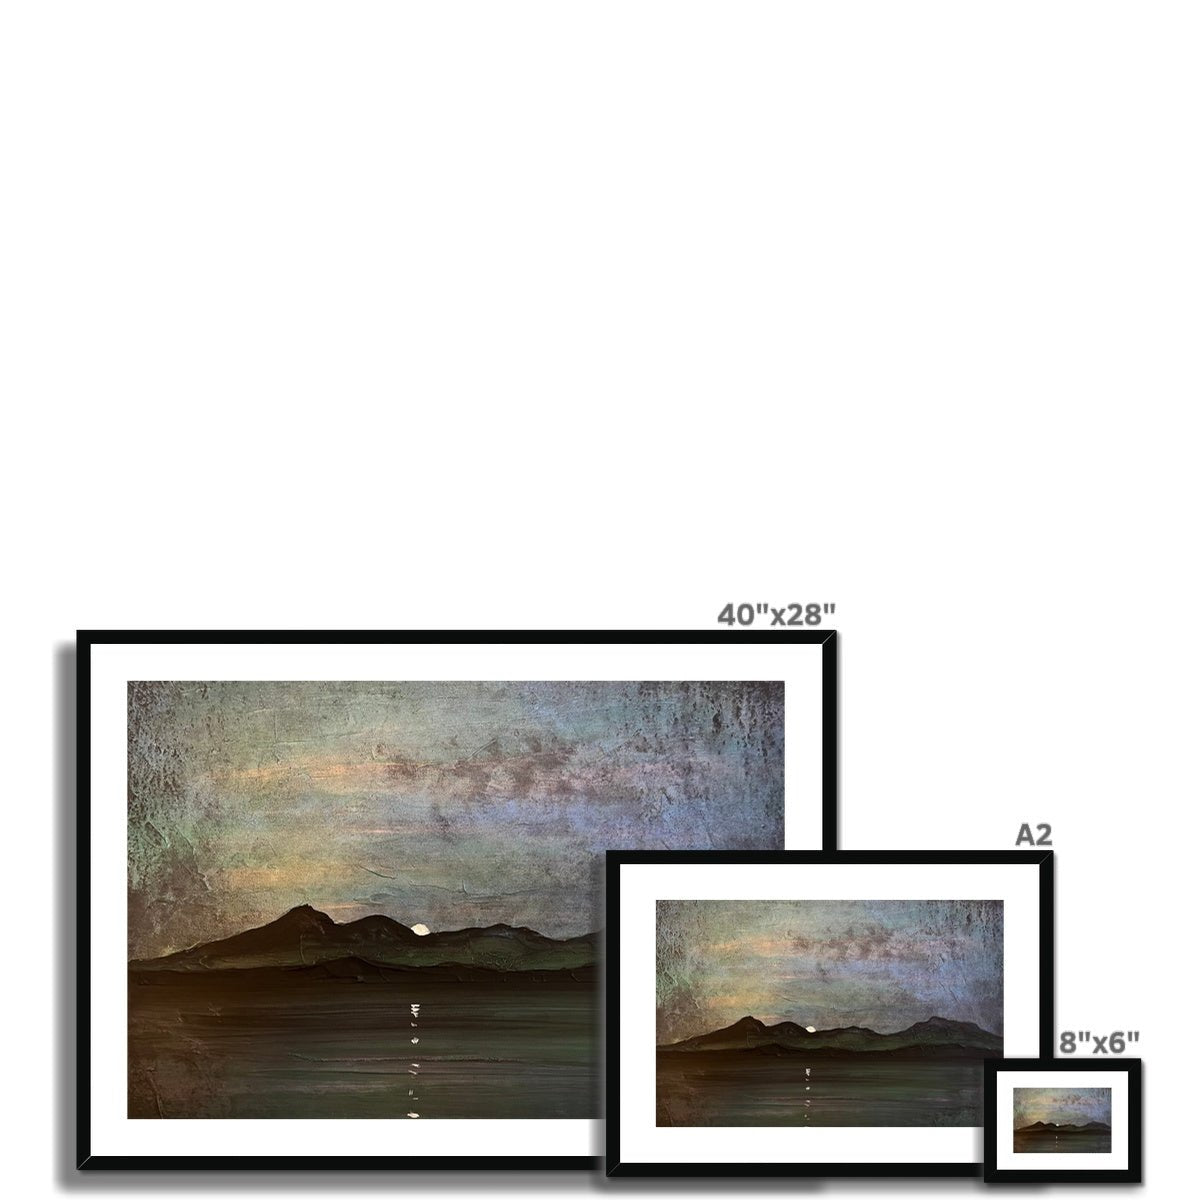 Sleeping Warrior Moonlight Arran Painting | Framed & Mounted Prints From Scotland-Framed & Mounted Prints-Arran Art Gallery-Paintings, Prints, Homeware, Art Gifts From Scotland By Scottish Artist Kevin Hunter